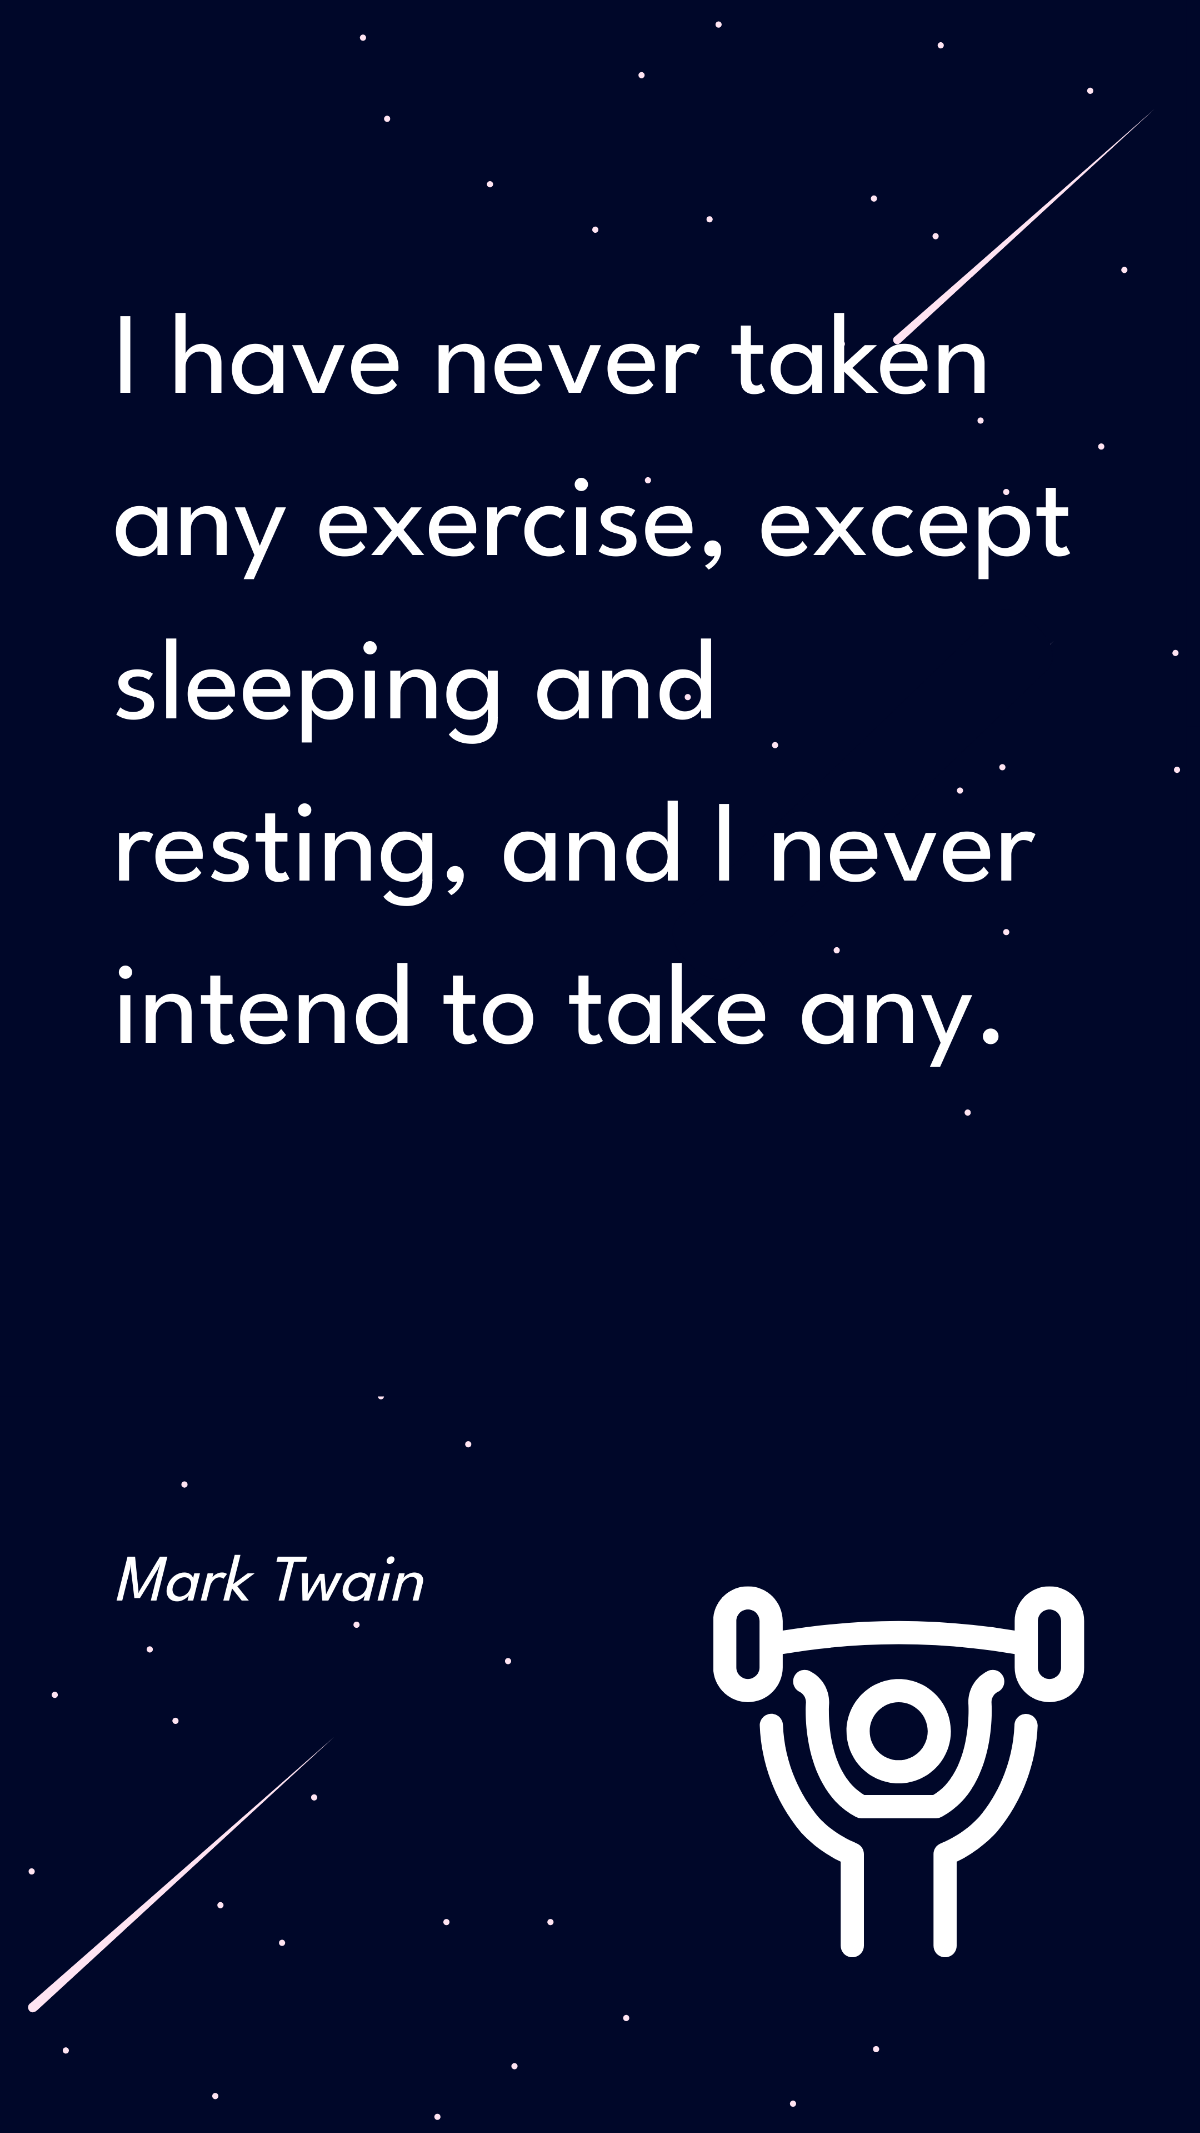 Mark Twain - I have never taken any exercise, except sleeping and resting, and I never intend to take any. Template